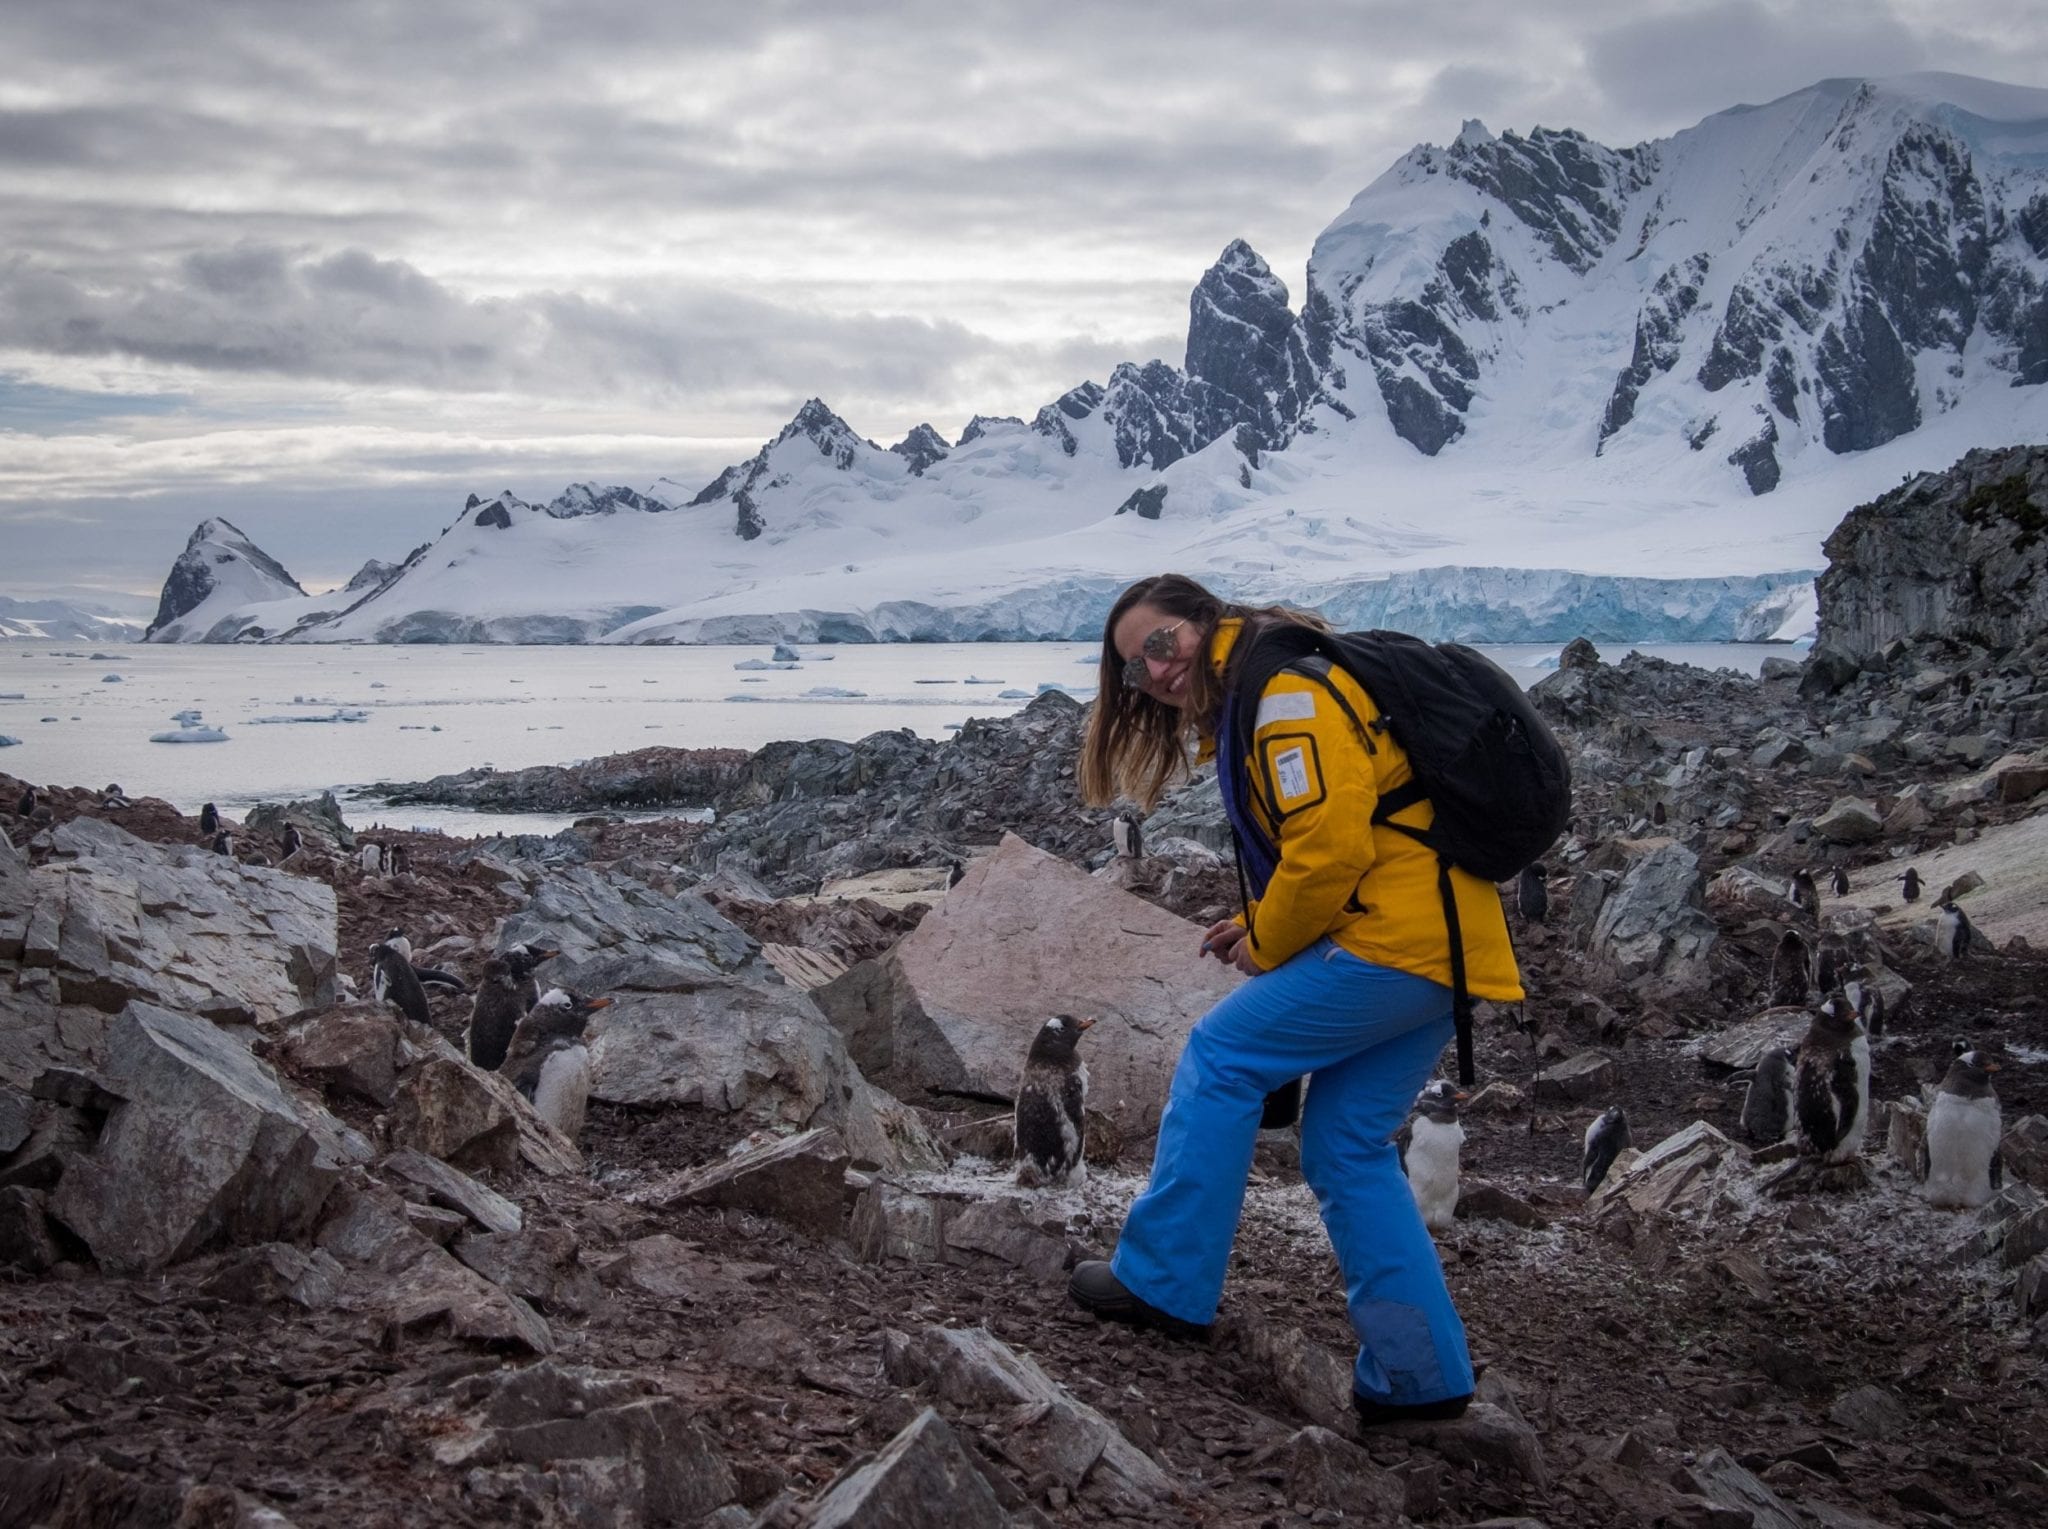 Kate wearing a yellow jacket, blue pants, and sunglasses and stepping on a rocky pile next to a penguin, tall snowy mountains behind her.